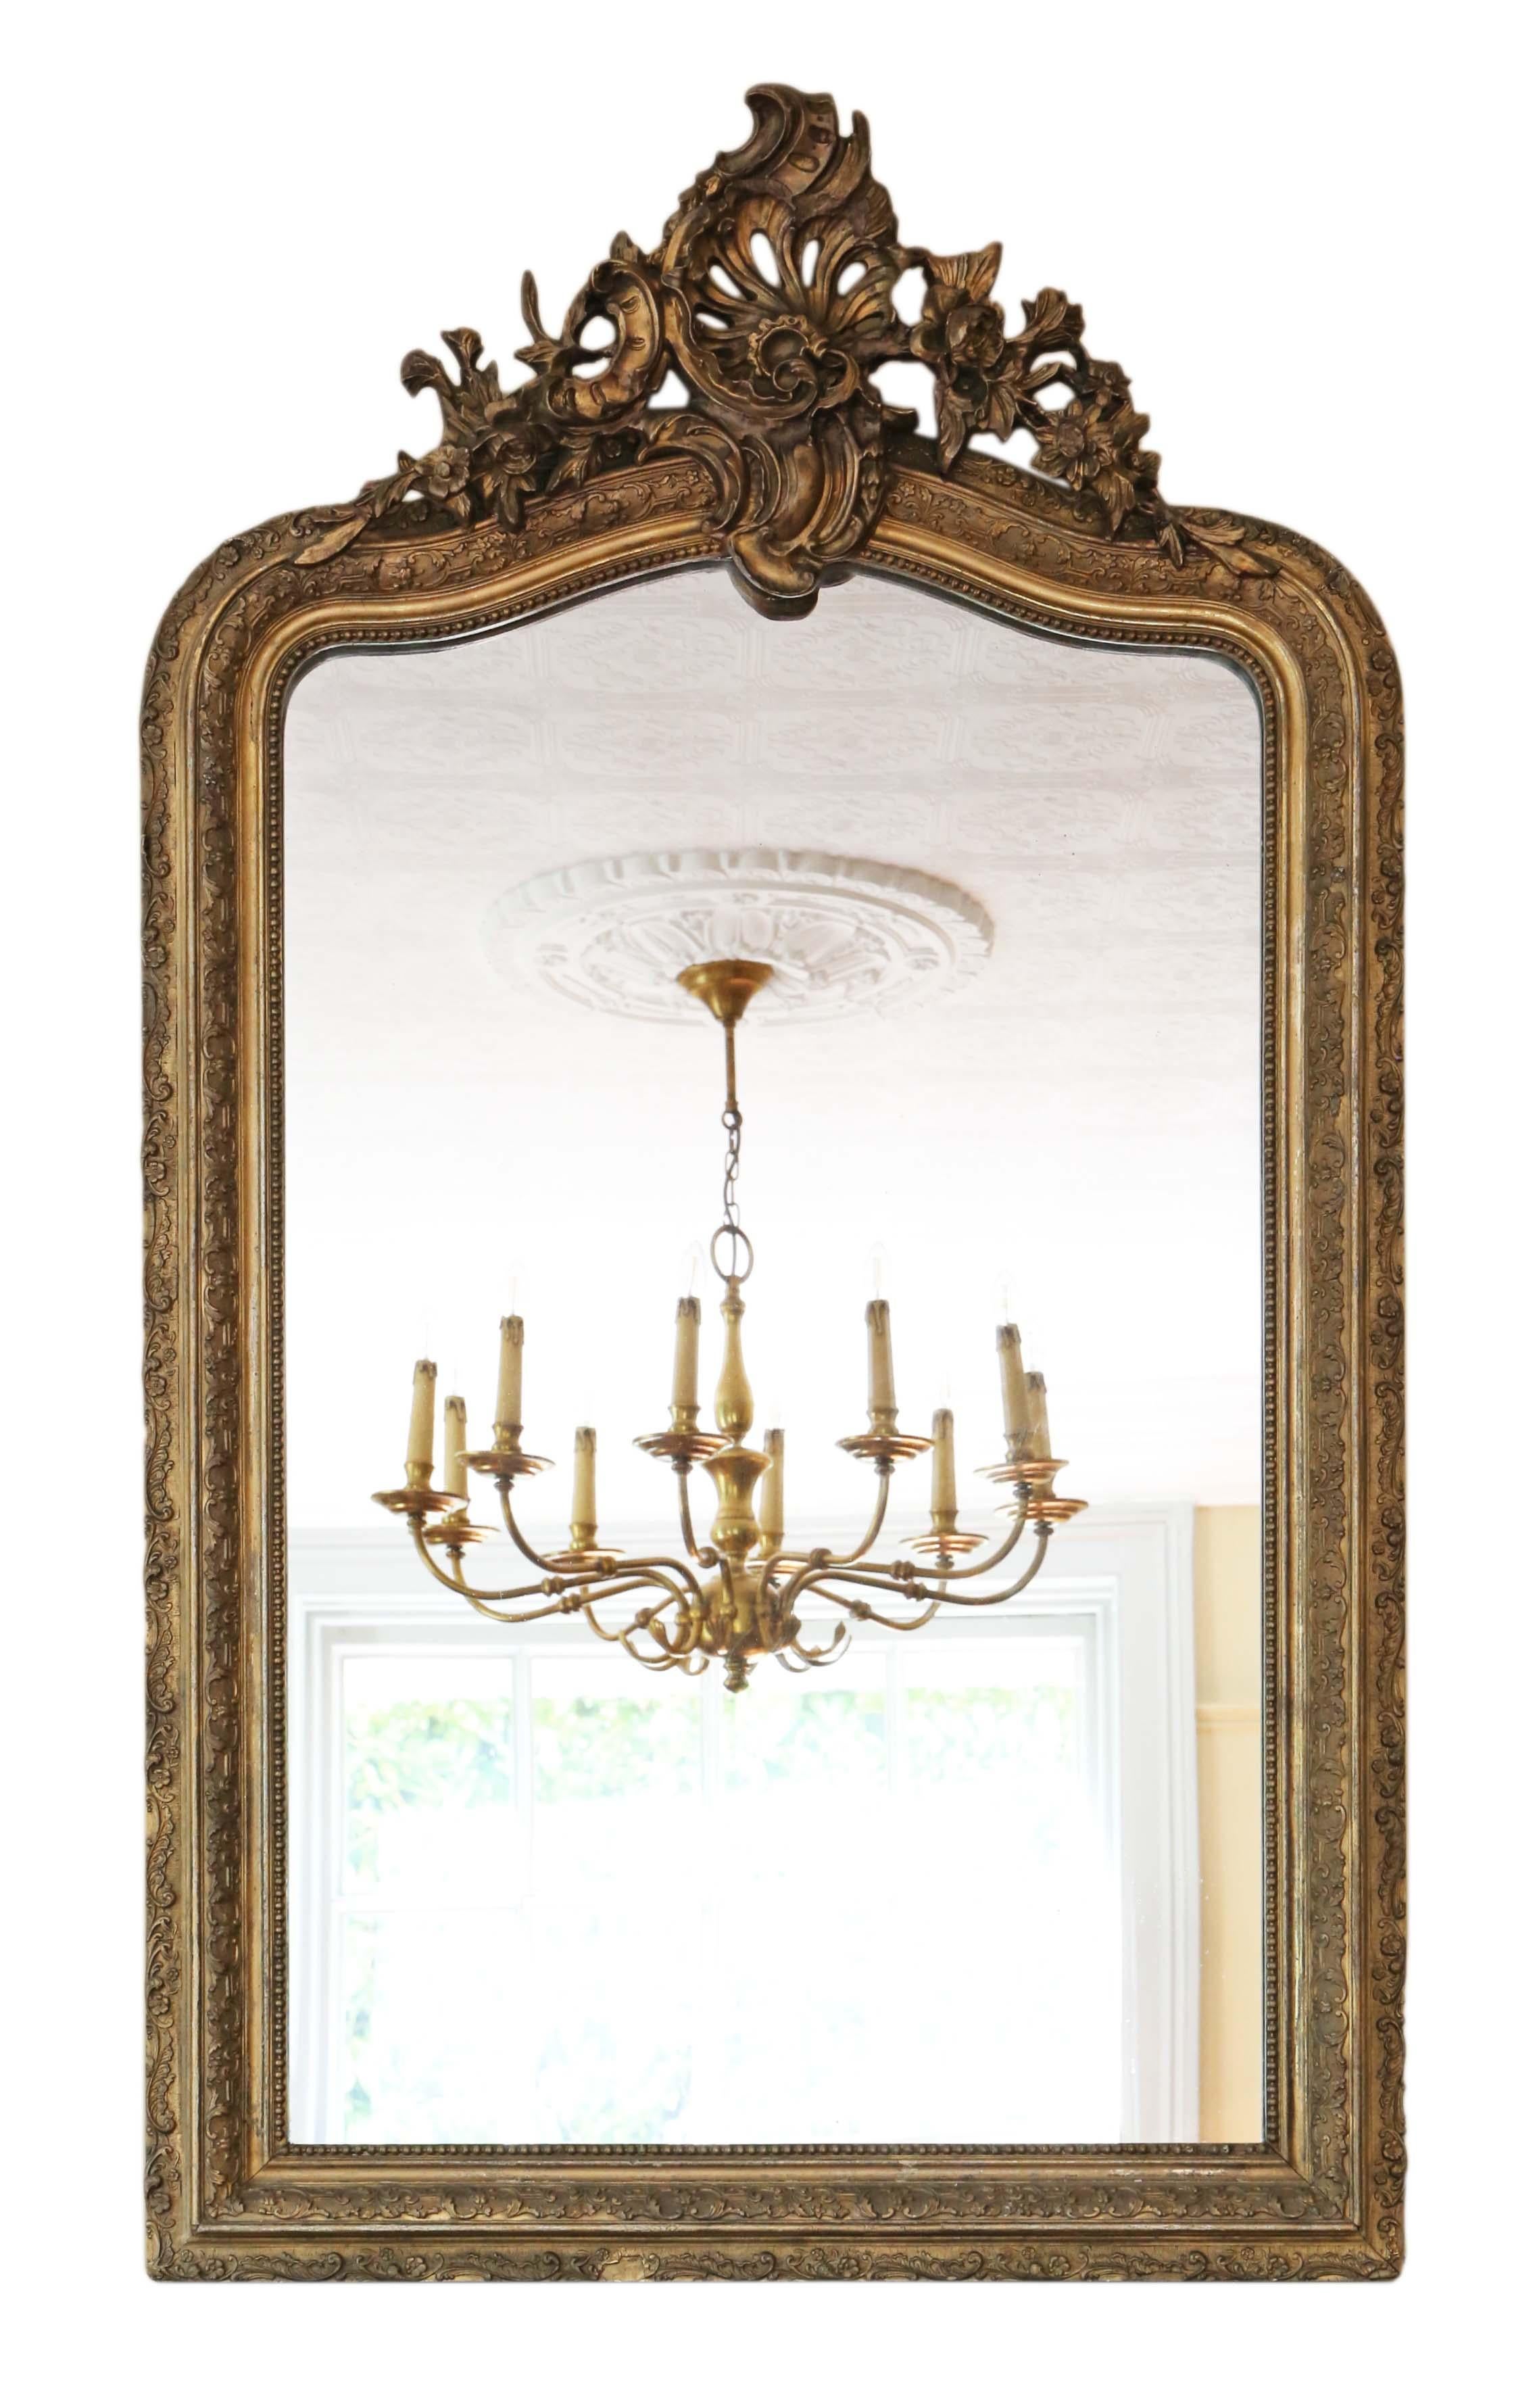 Antique large fine quality gilt wall mirror or overmantle, late 19th century, C1895. Lovely charm and elegance.

An impressive rare find, that would look amazing in the right location. No loose joints.

The original mirrored glass is in good